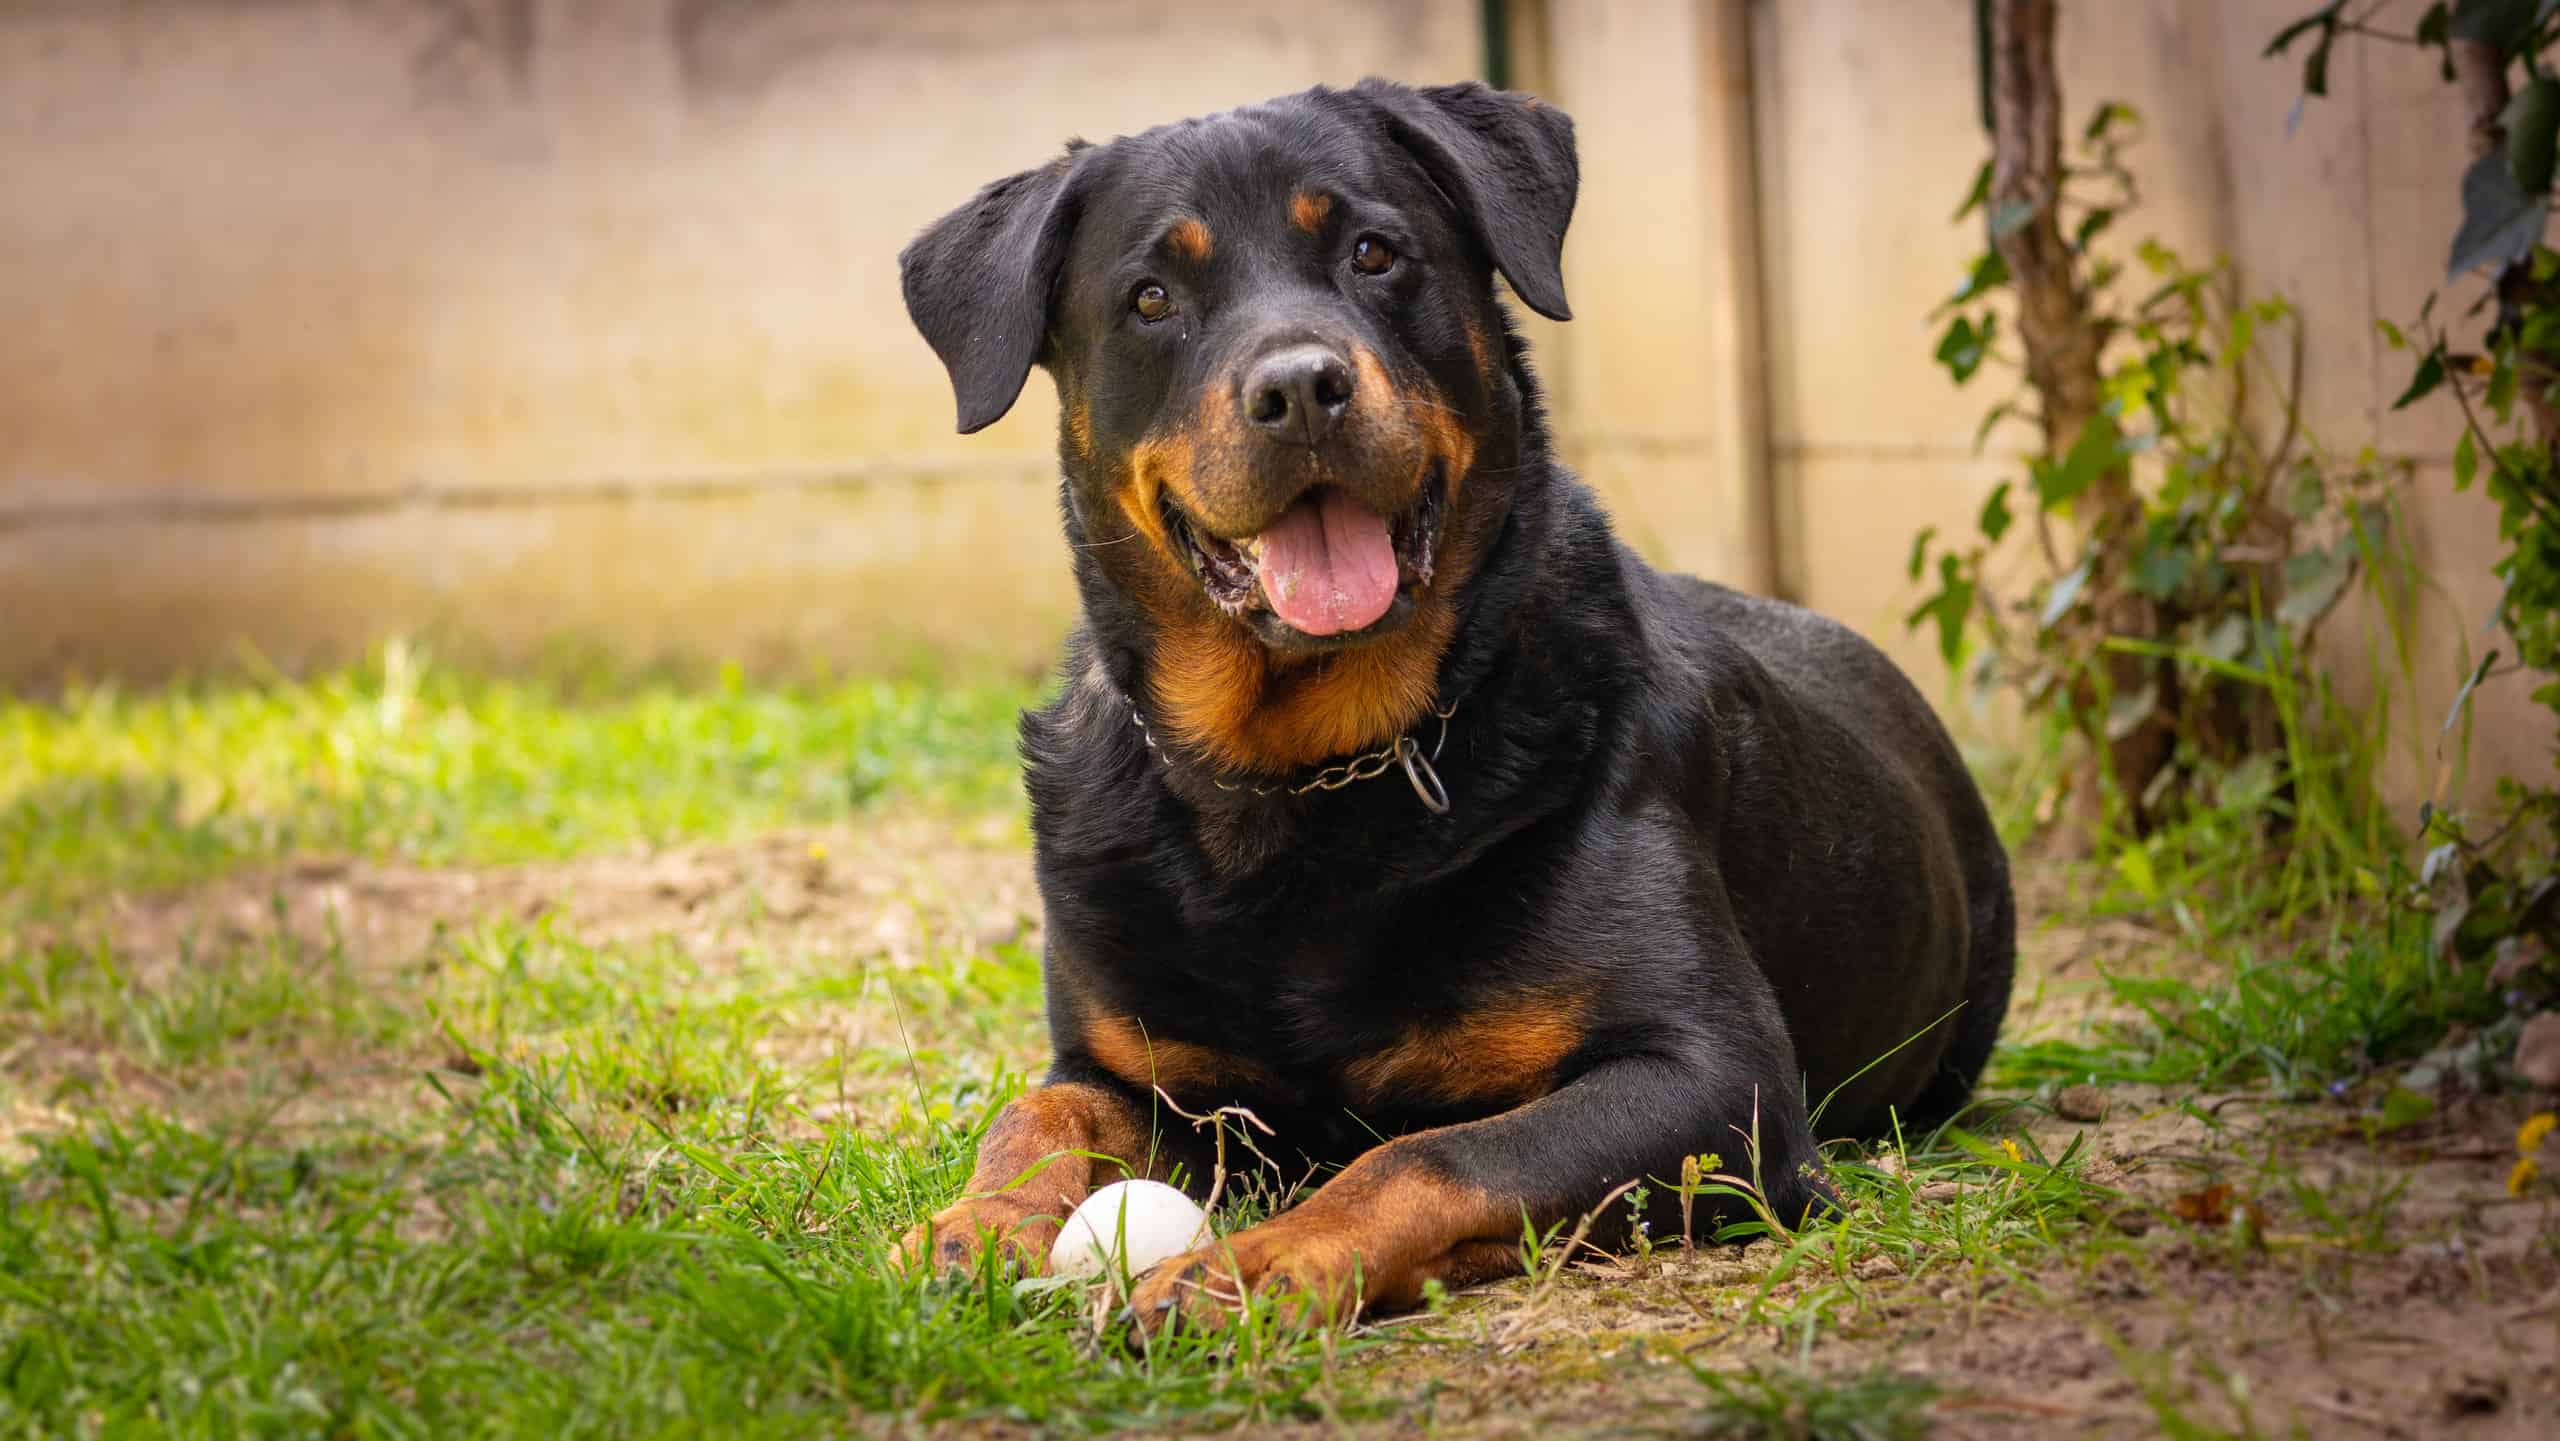 how old is too old to breed a rottweiler?